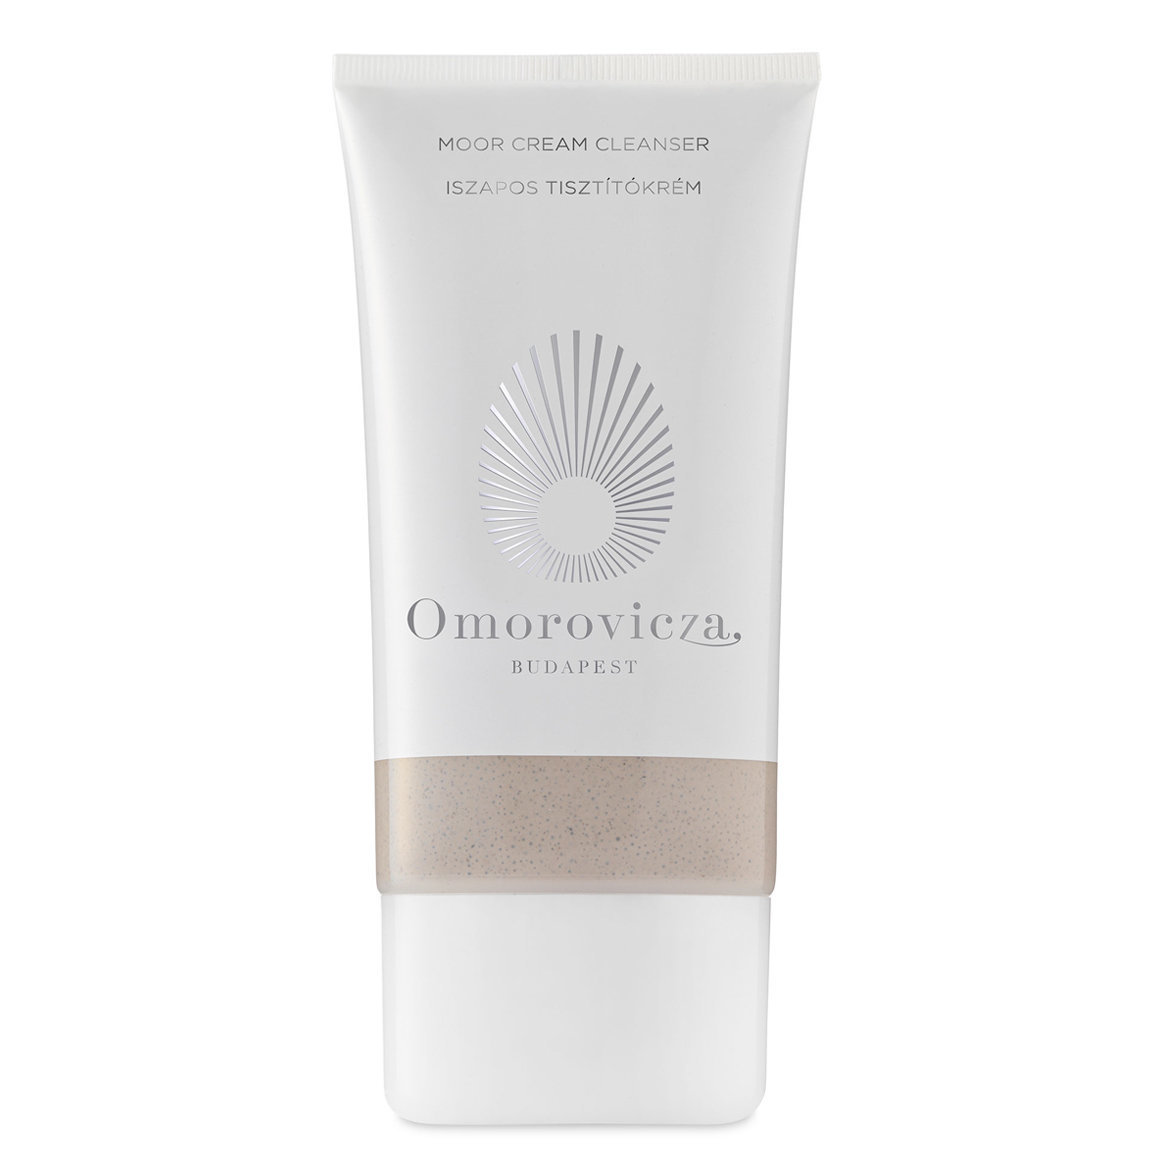 Omorovicza Moor Cream Cleanser alternative view 1 - product swatch.